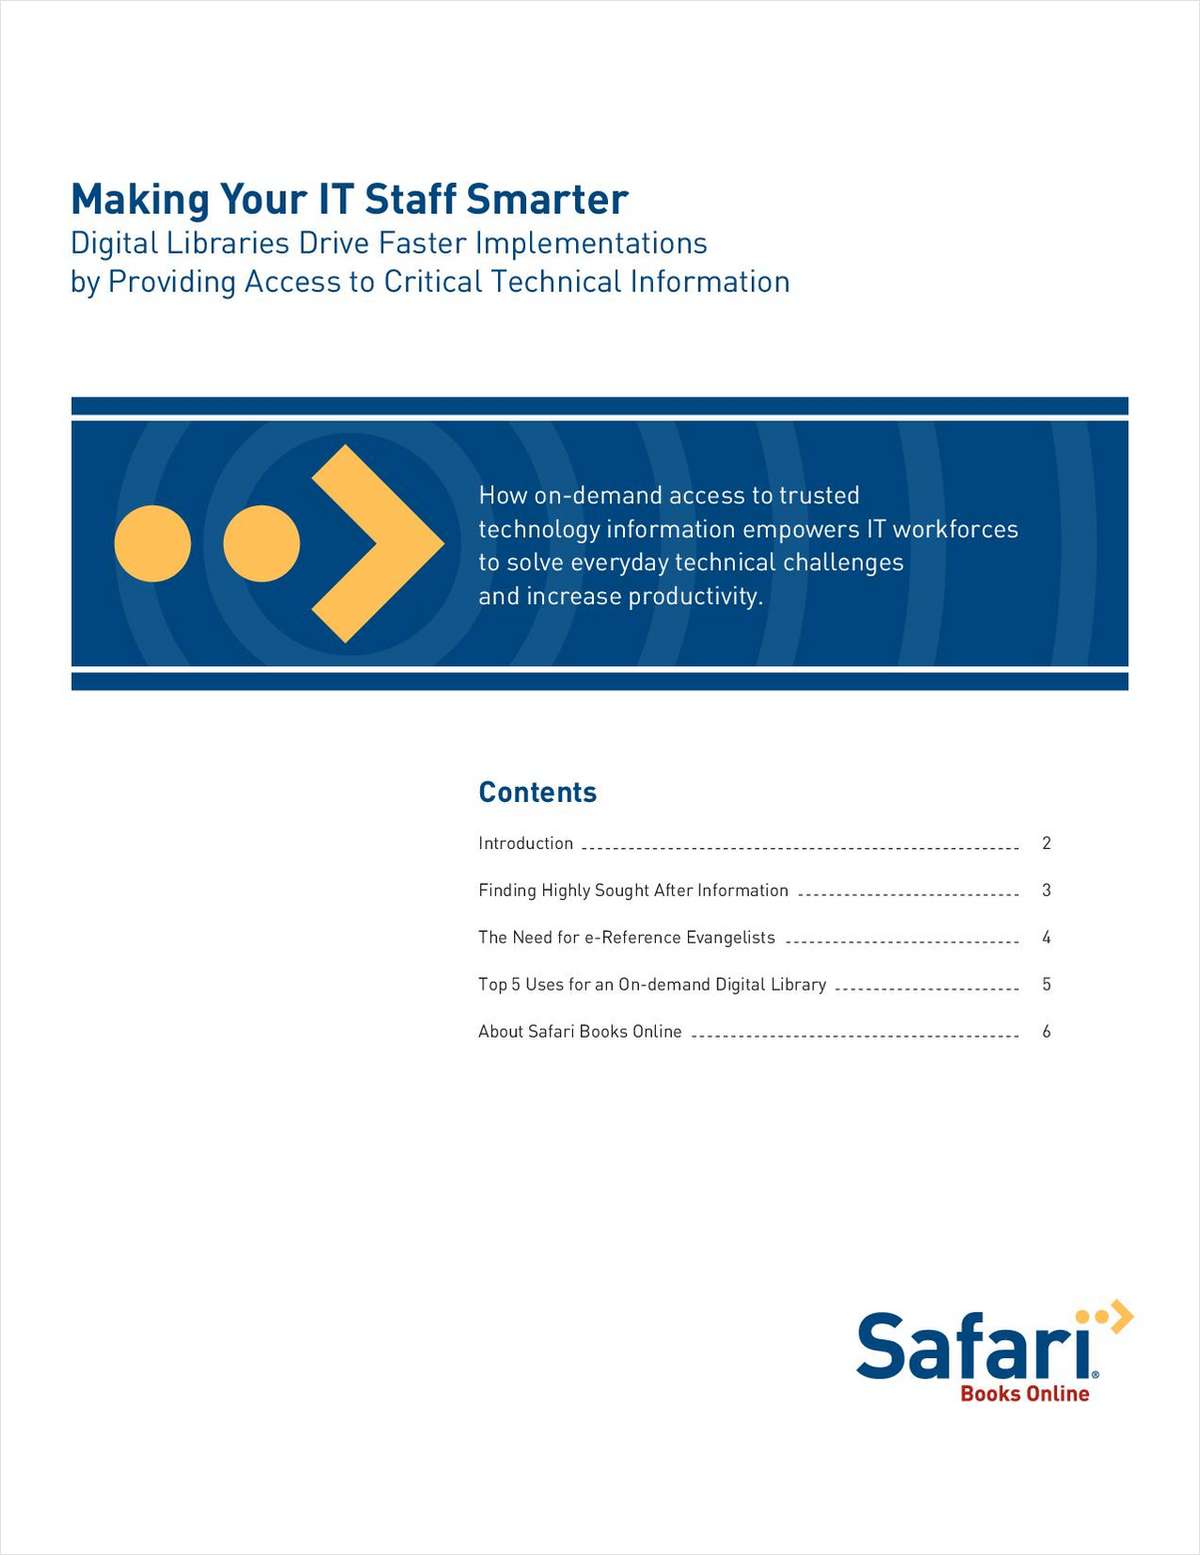 How to Make Your IT Staff Smarter